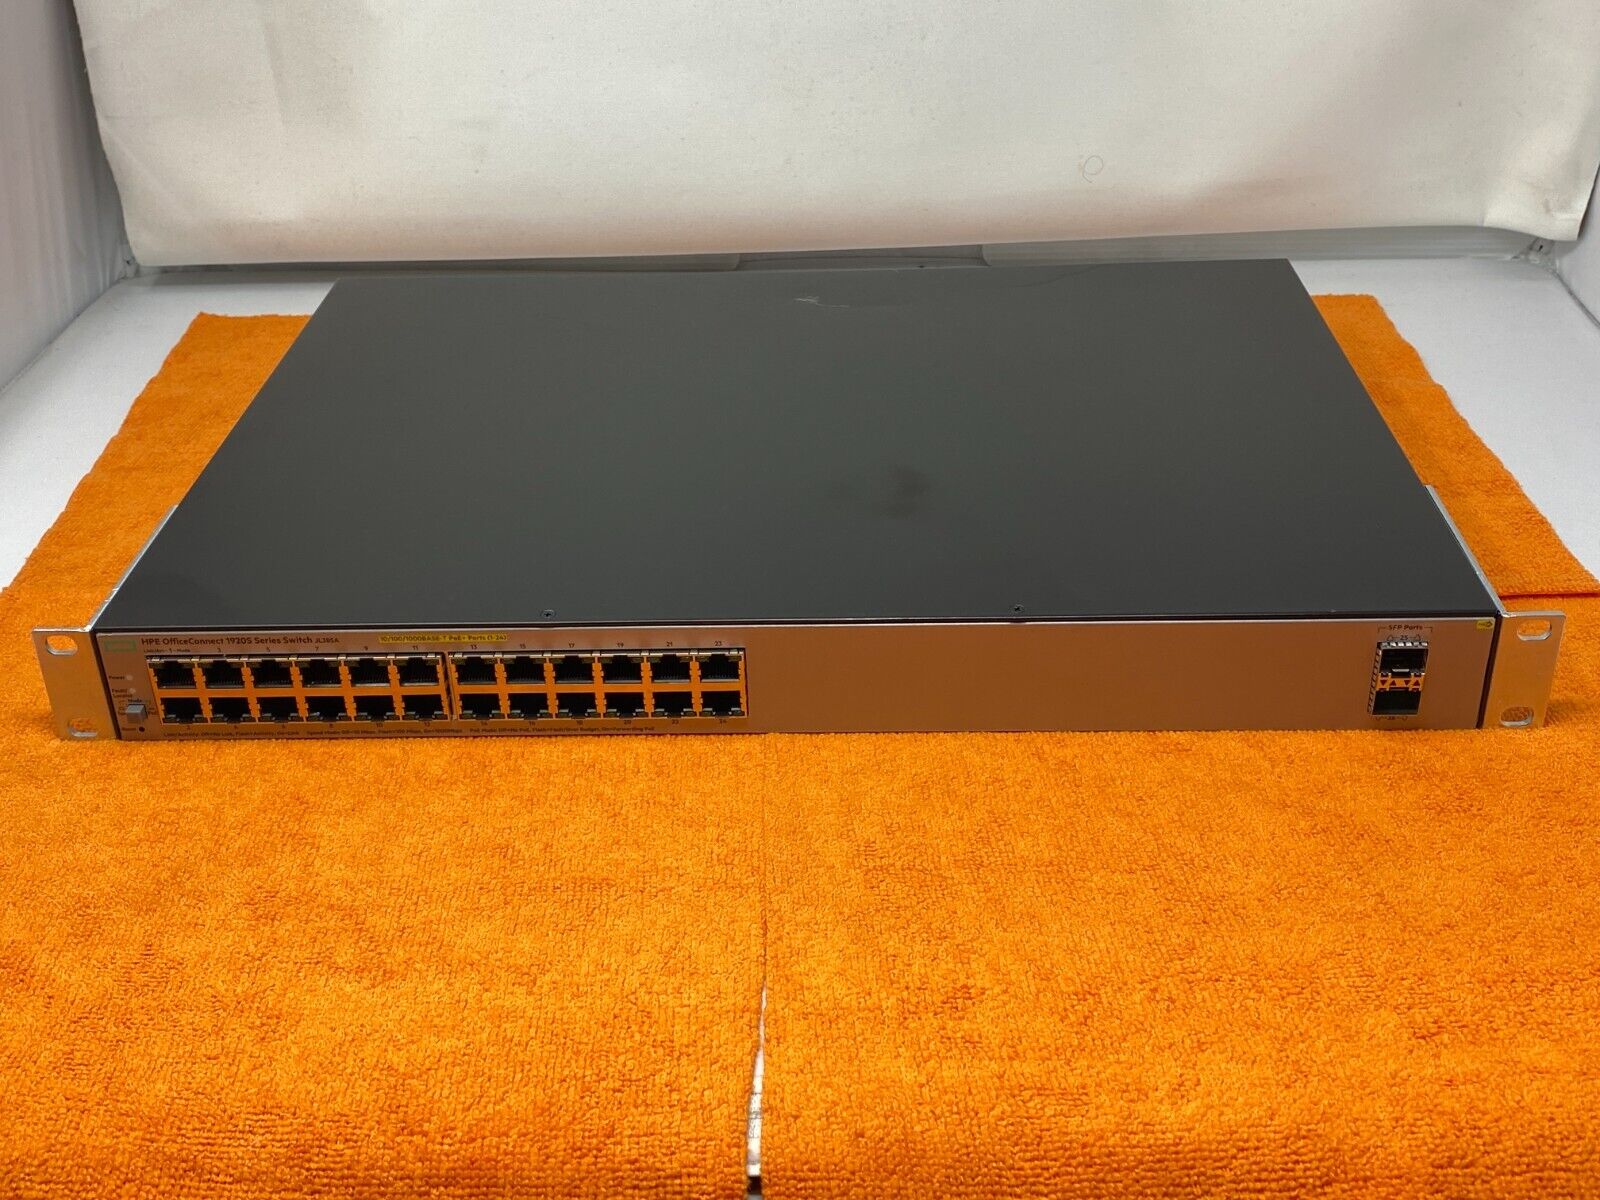 HPE OFFICE CONNECT JL385A 1920s 24G PoE 24-Port 2 SFP ETHERNET SWITCH W/RACK EAR